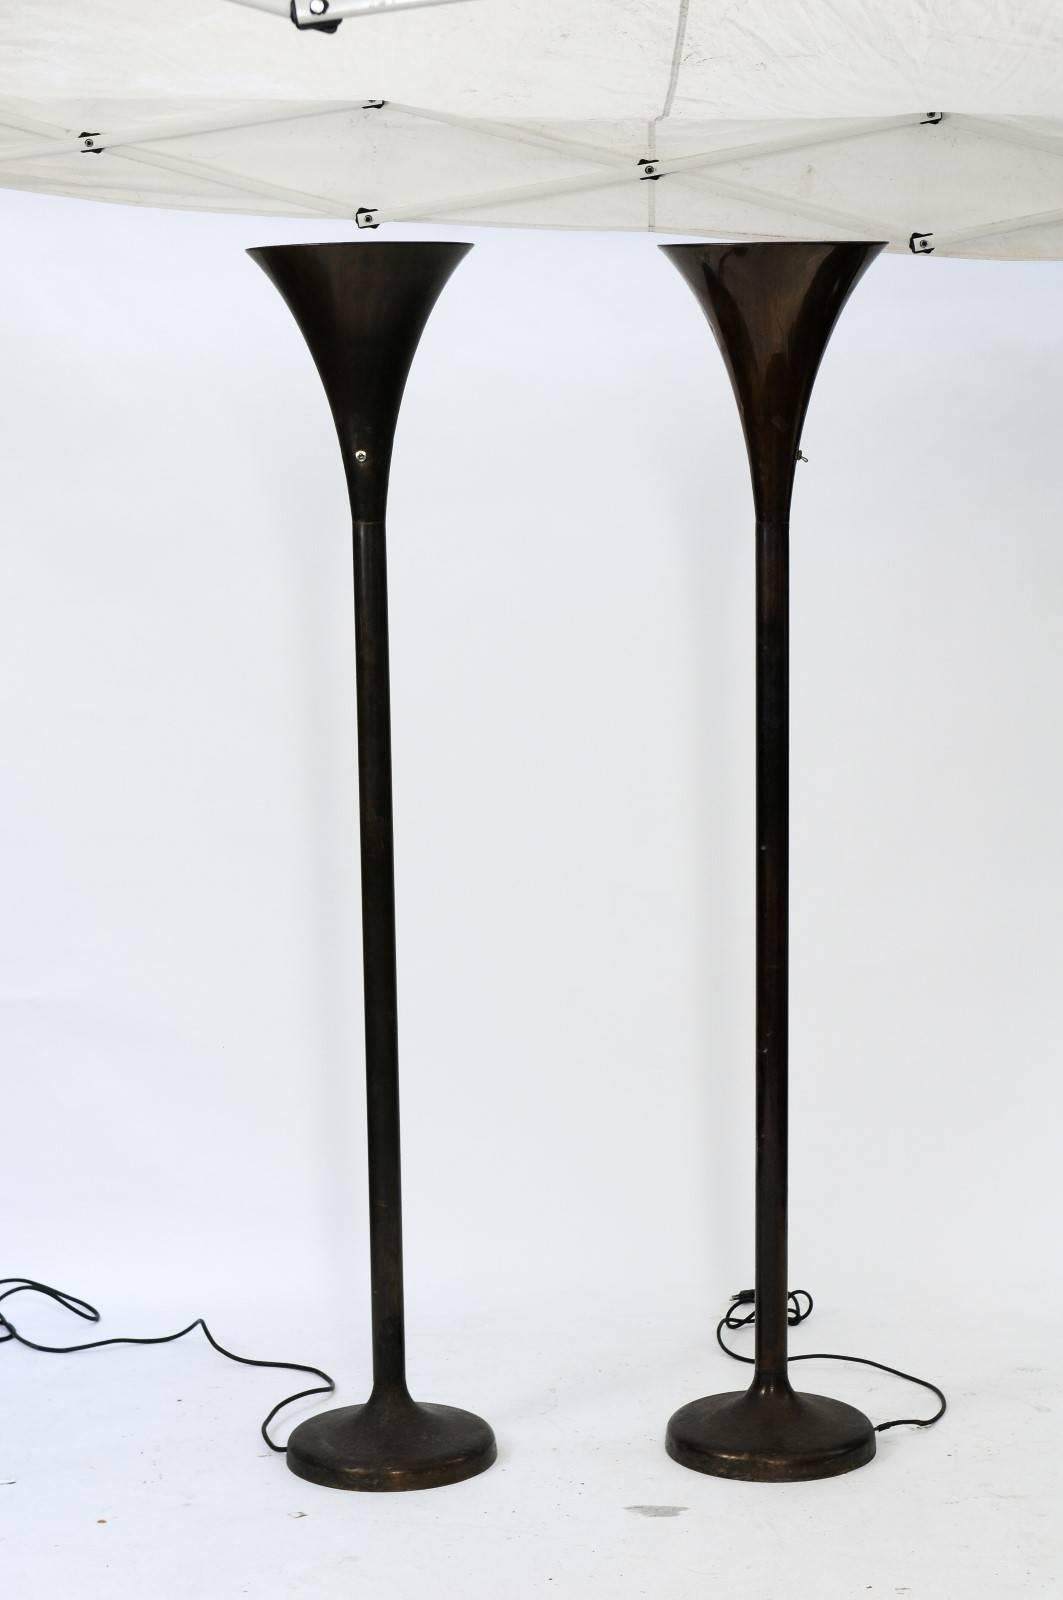 Mid-Century Modern Pair of French Black Metal Torchères Floor Lamps from the 1950s